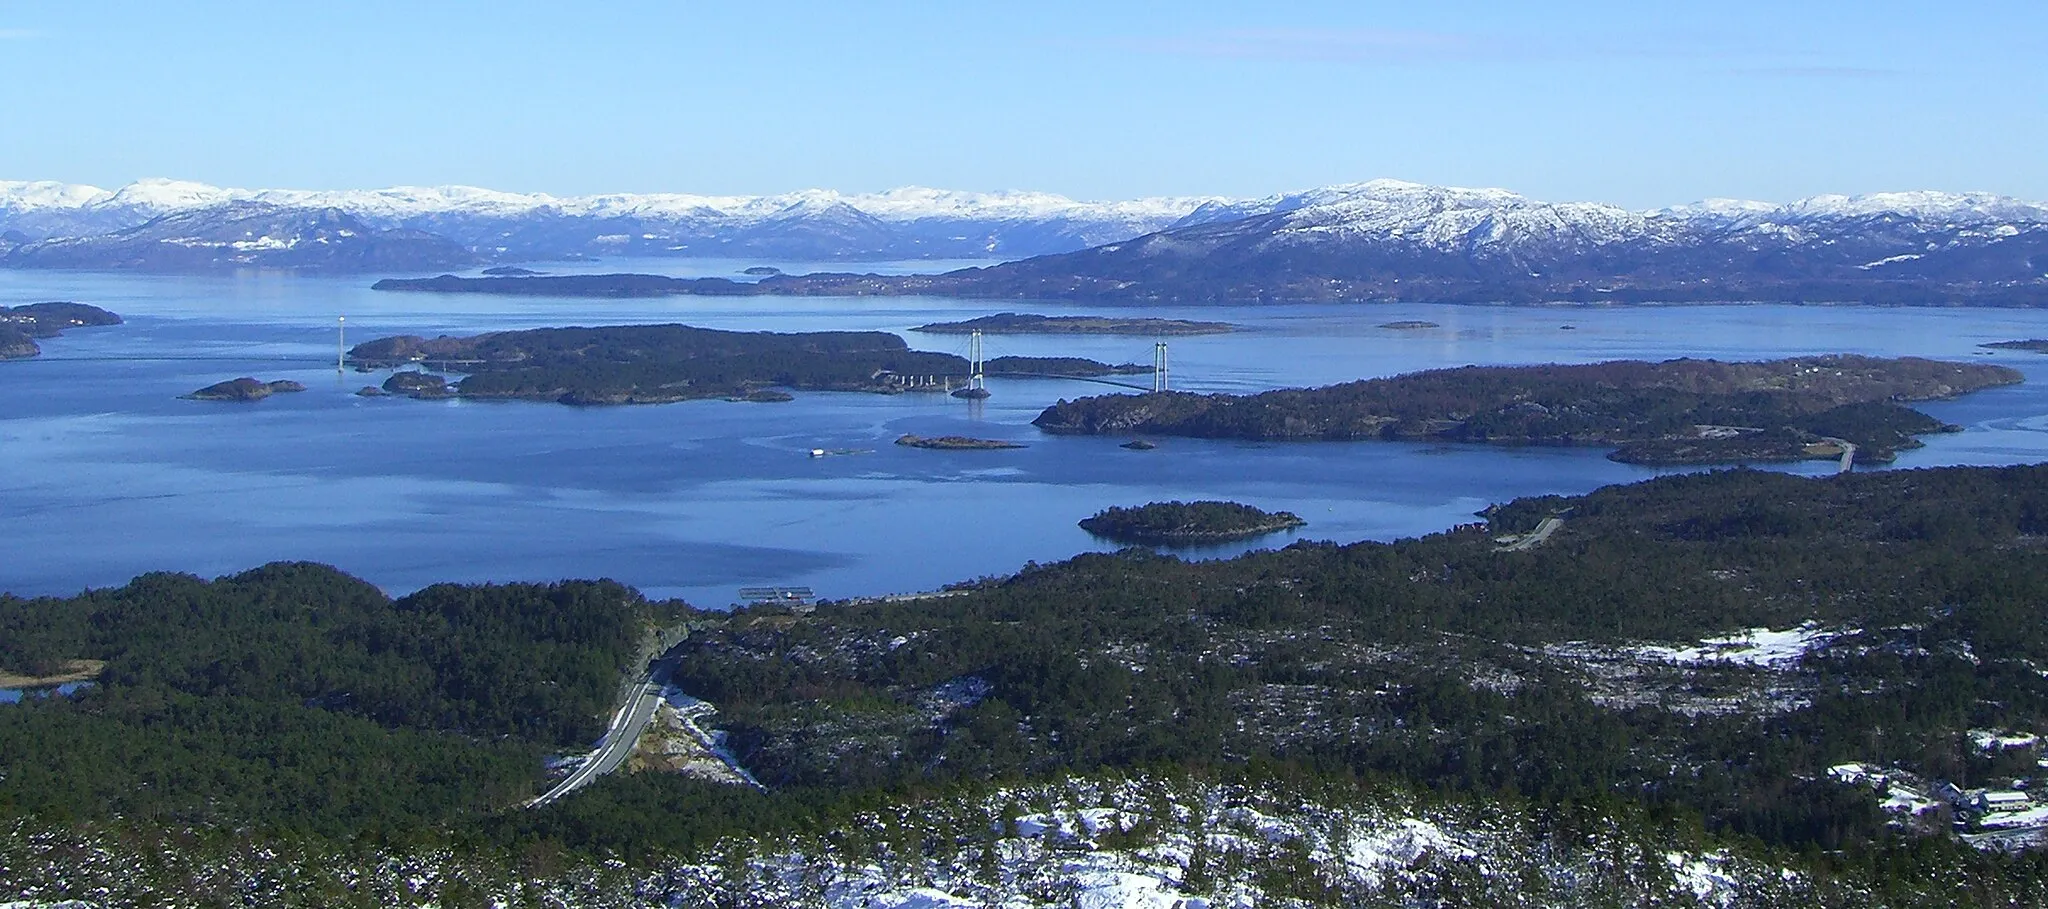 Photo showing: View of Bømlafjorden from Bømlo. To the left of the center is the island of Nautøy with Føyno behind it, and Spissøy to the right. The bridge to the left is Stord Bridge and in the middle Bømlo Bridge, both part of the Triangle Link